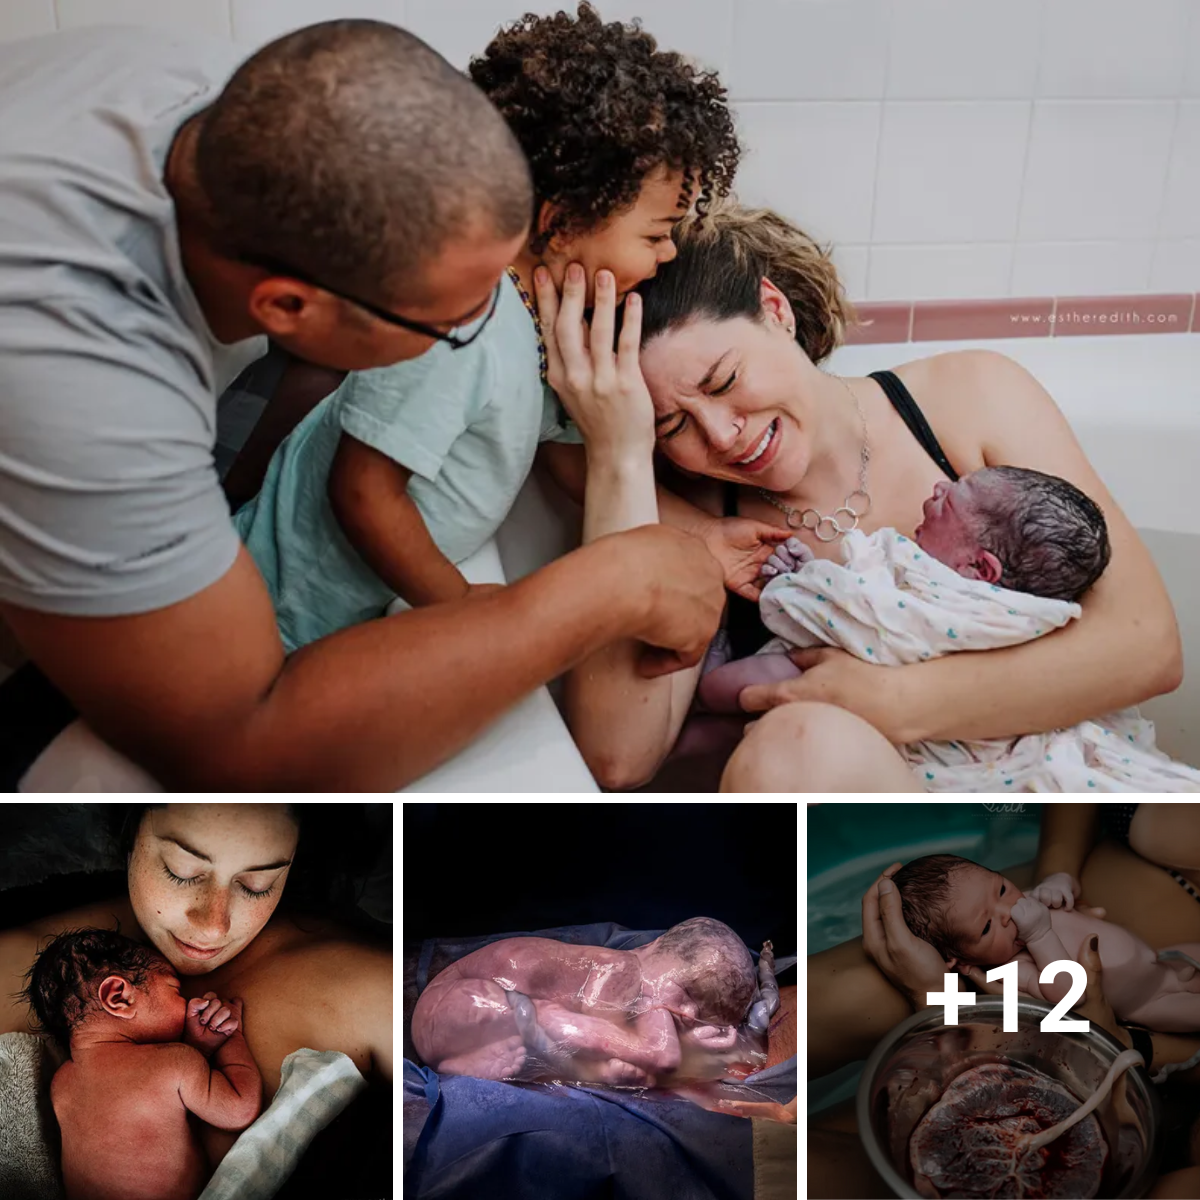 Using provided photos to capture the raw, intimate, and unvarnished truth of the birthing process